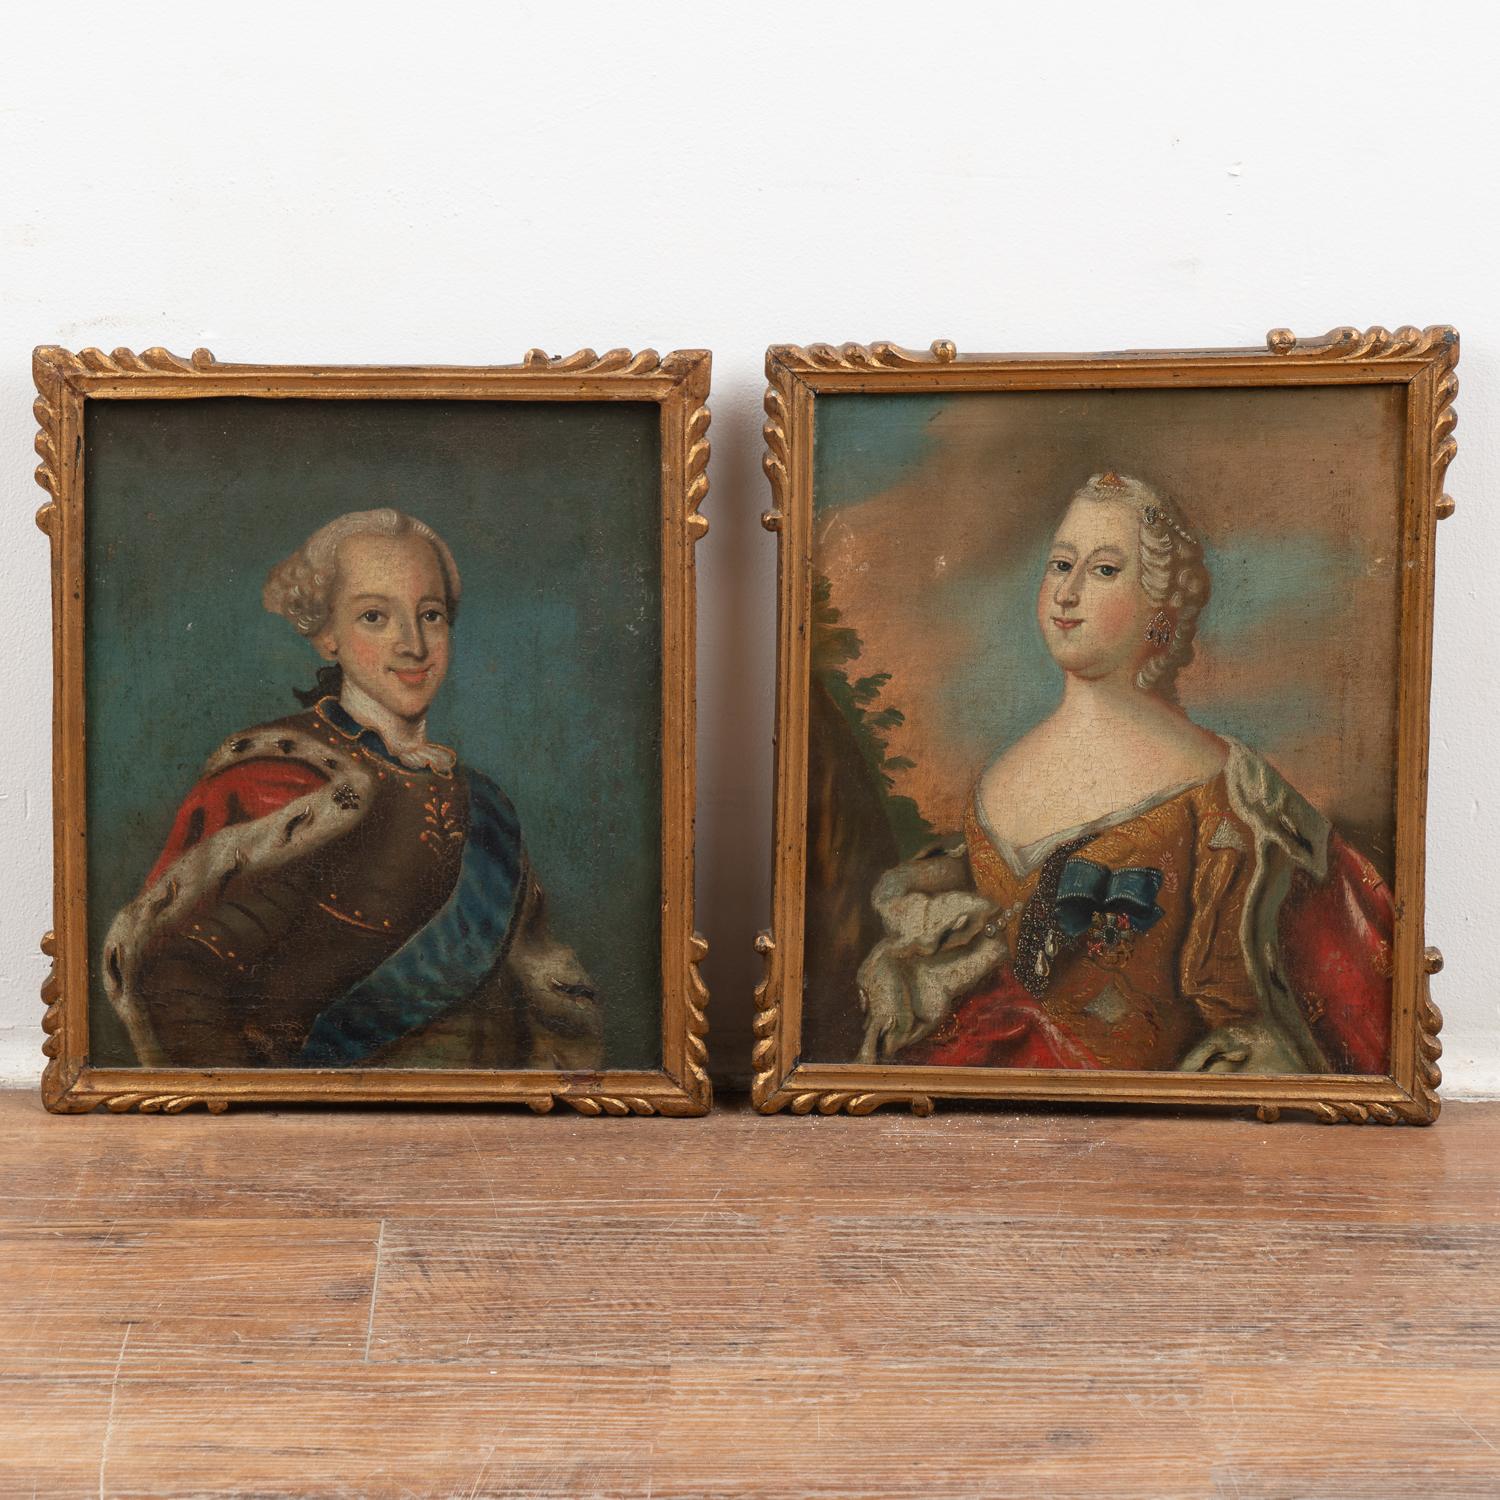 Pair, Original oil on canvas portraits of King Frederik V (1723–1766) and Dronning Louise (1724–1751). Unsigned.
Danish school, 18th Century.

Condition: Craquelure throughout, superficial scratches and pressure marks with peelings; old re-touches.